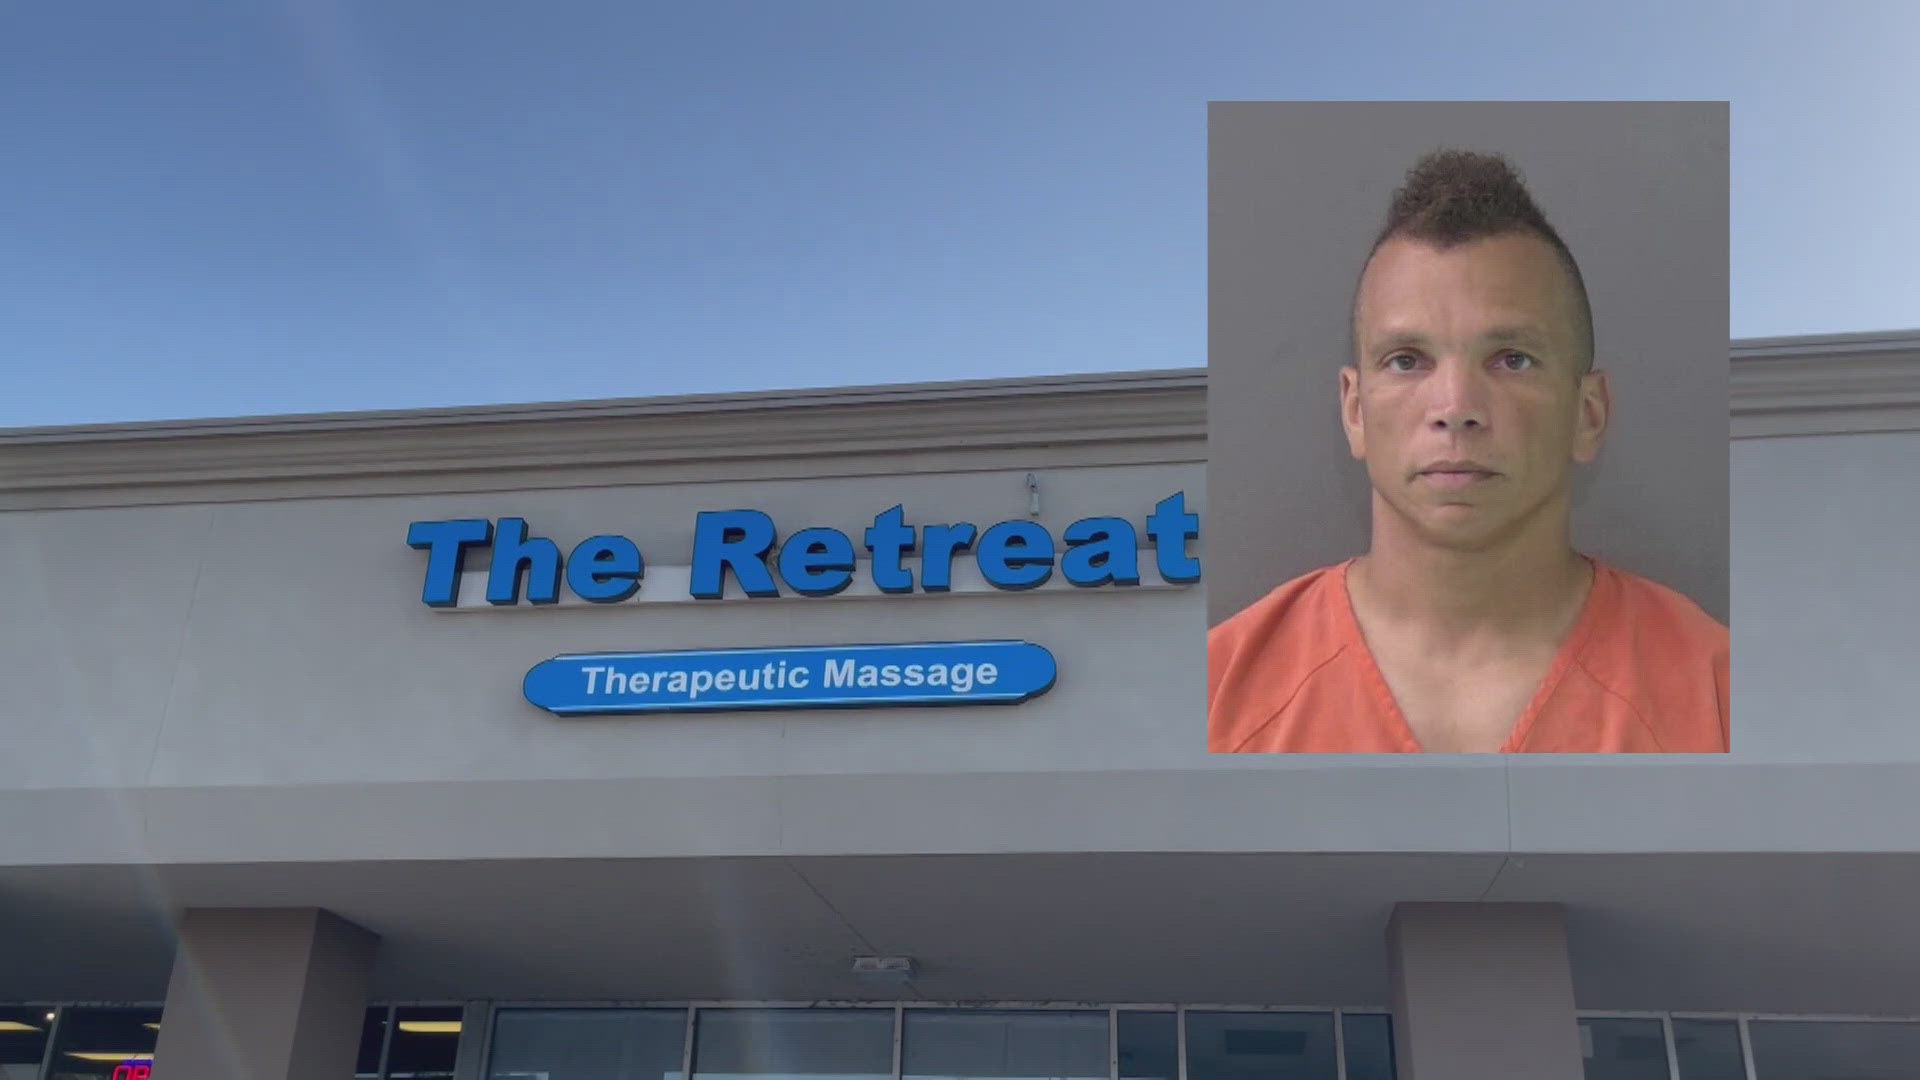 Police said three victims have now come forward with accusations against DeMarr Thomas, the owner of The Retreat Therapeutic Massage in Belton.